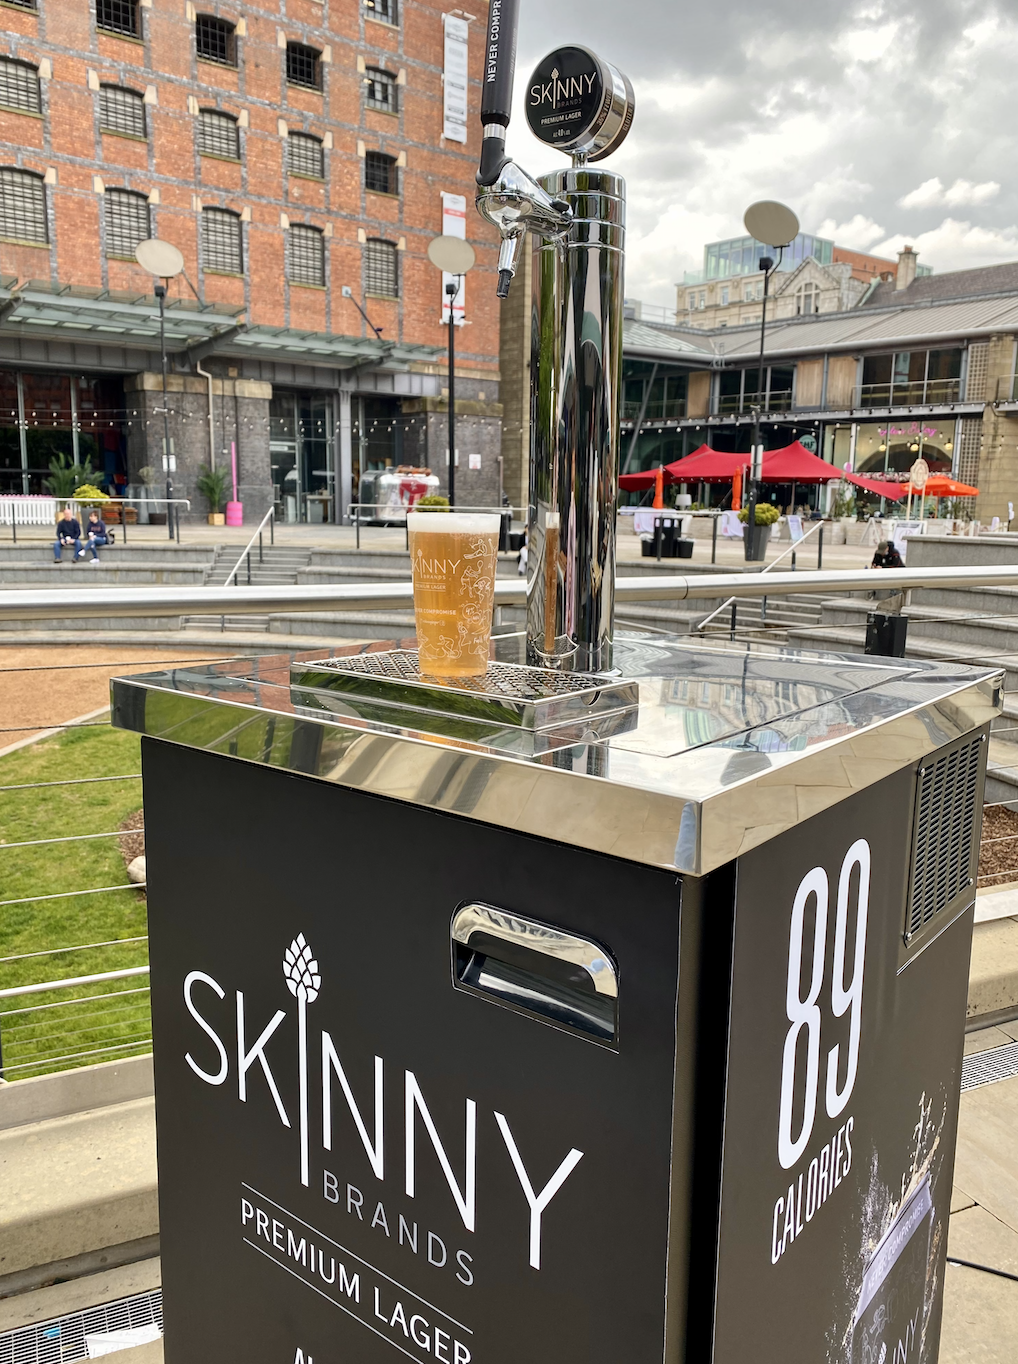 Skinny Lager is helping venues get back on their feet with £2,000 bar kit and 100 pints, The Manc